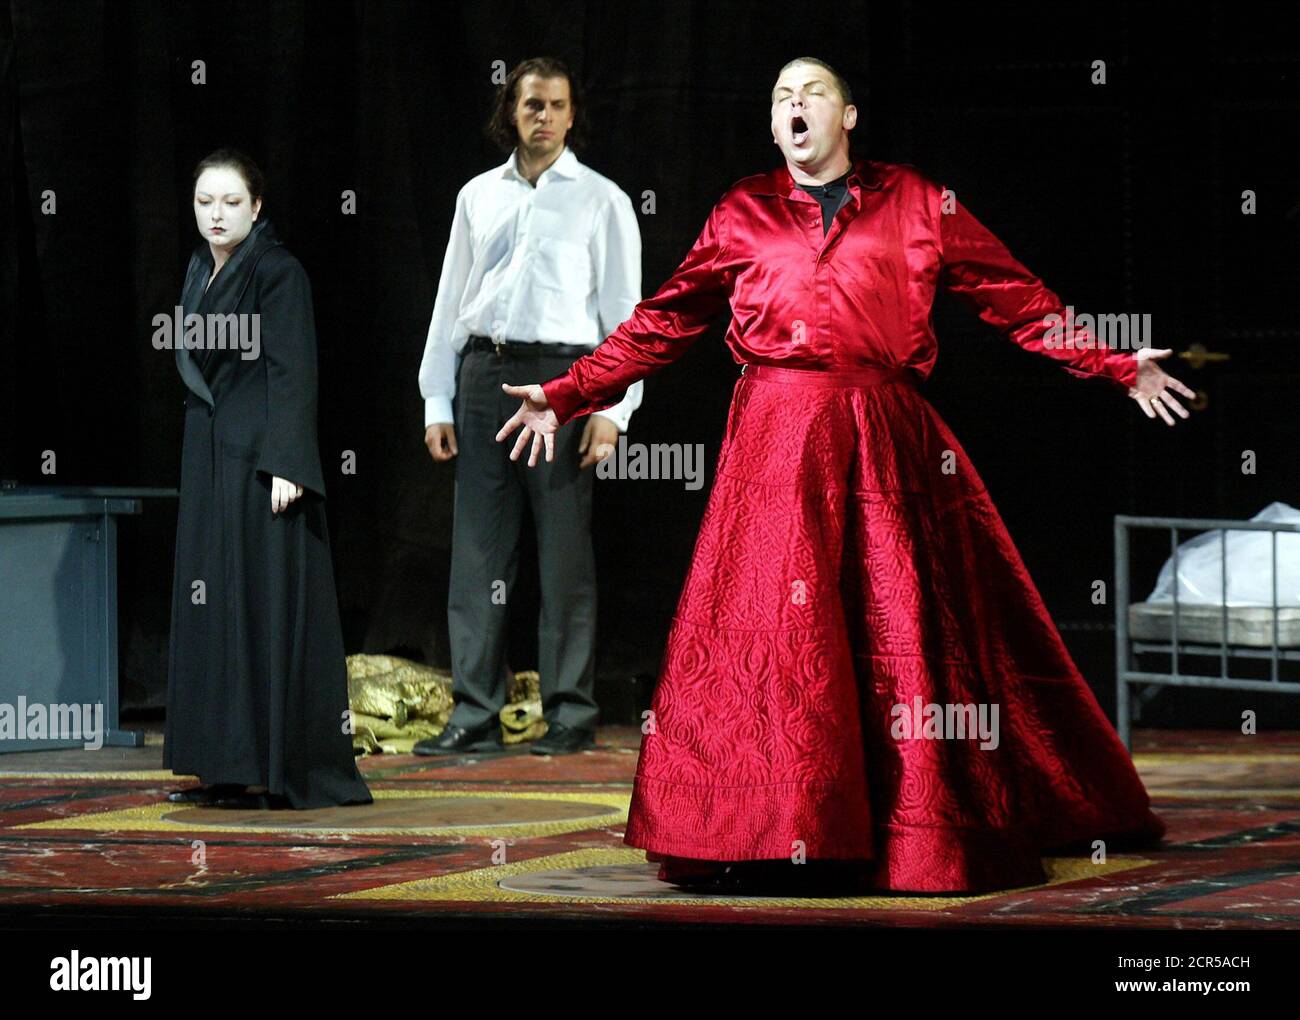 Michael Schade is seen as Tito Vespasiano (R), Luca Pisaroni as Publio (C) and Dorothea Roeschmann as Vitellia (L) during a dress rehearsal of Wolfgang Amadeus Mozart's opera 'La Clemenza di Tito'. Picture taken at the Salzburg Festival August 1, 2003. The world famous cultural Salzburg Festival (Salzburger Festspiele) lasts from Friday July 25 to Sunday August 31 and the play has its premiere night August 6, 2003. REUTERS/Leonhard Foeger REUTERS  LF/ Stock Photo